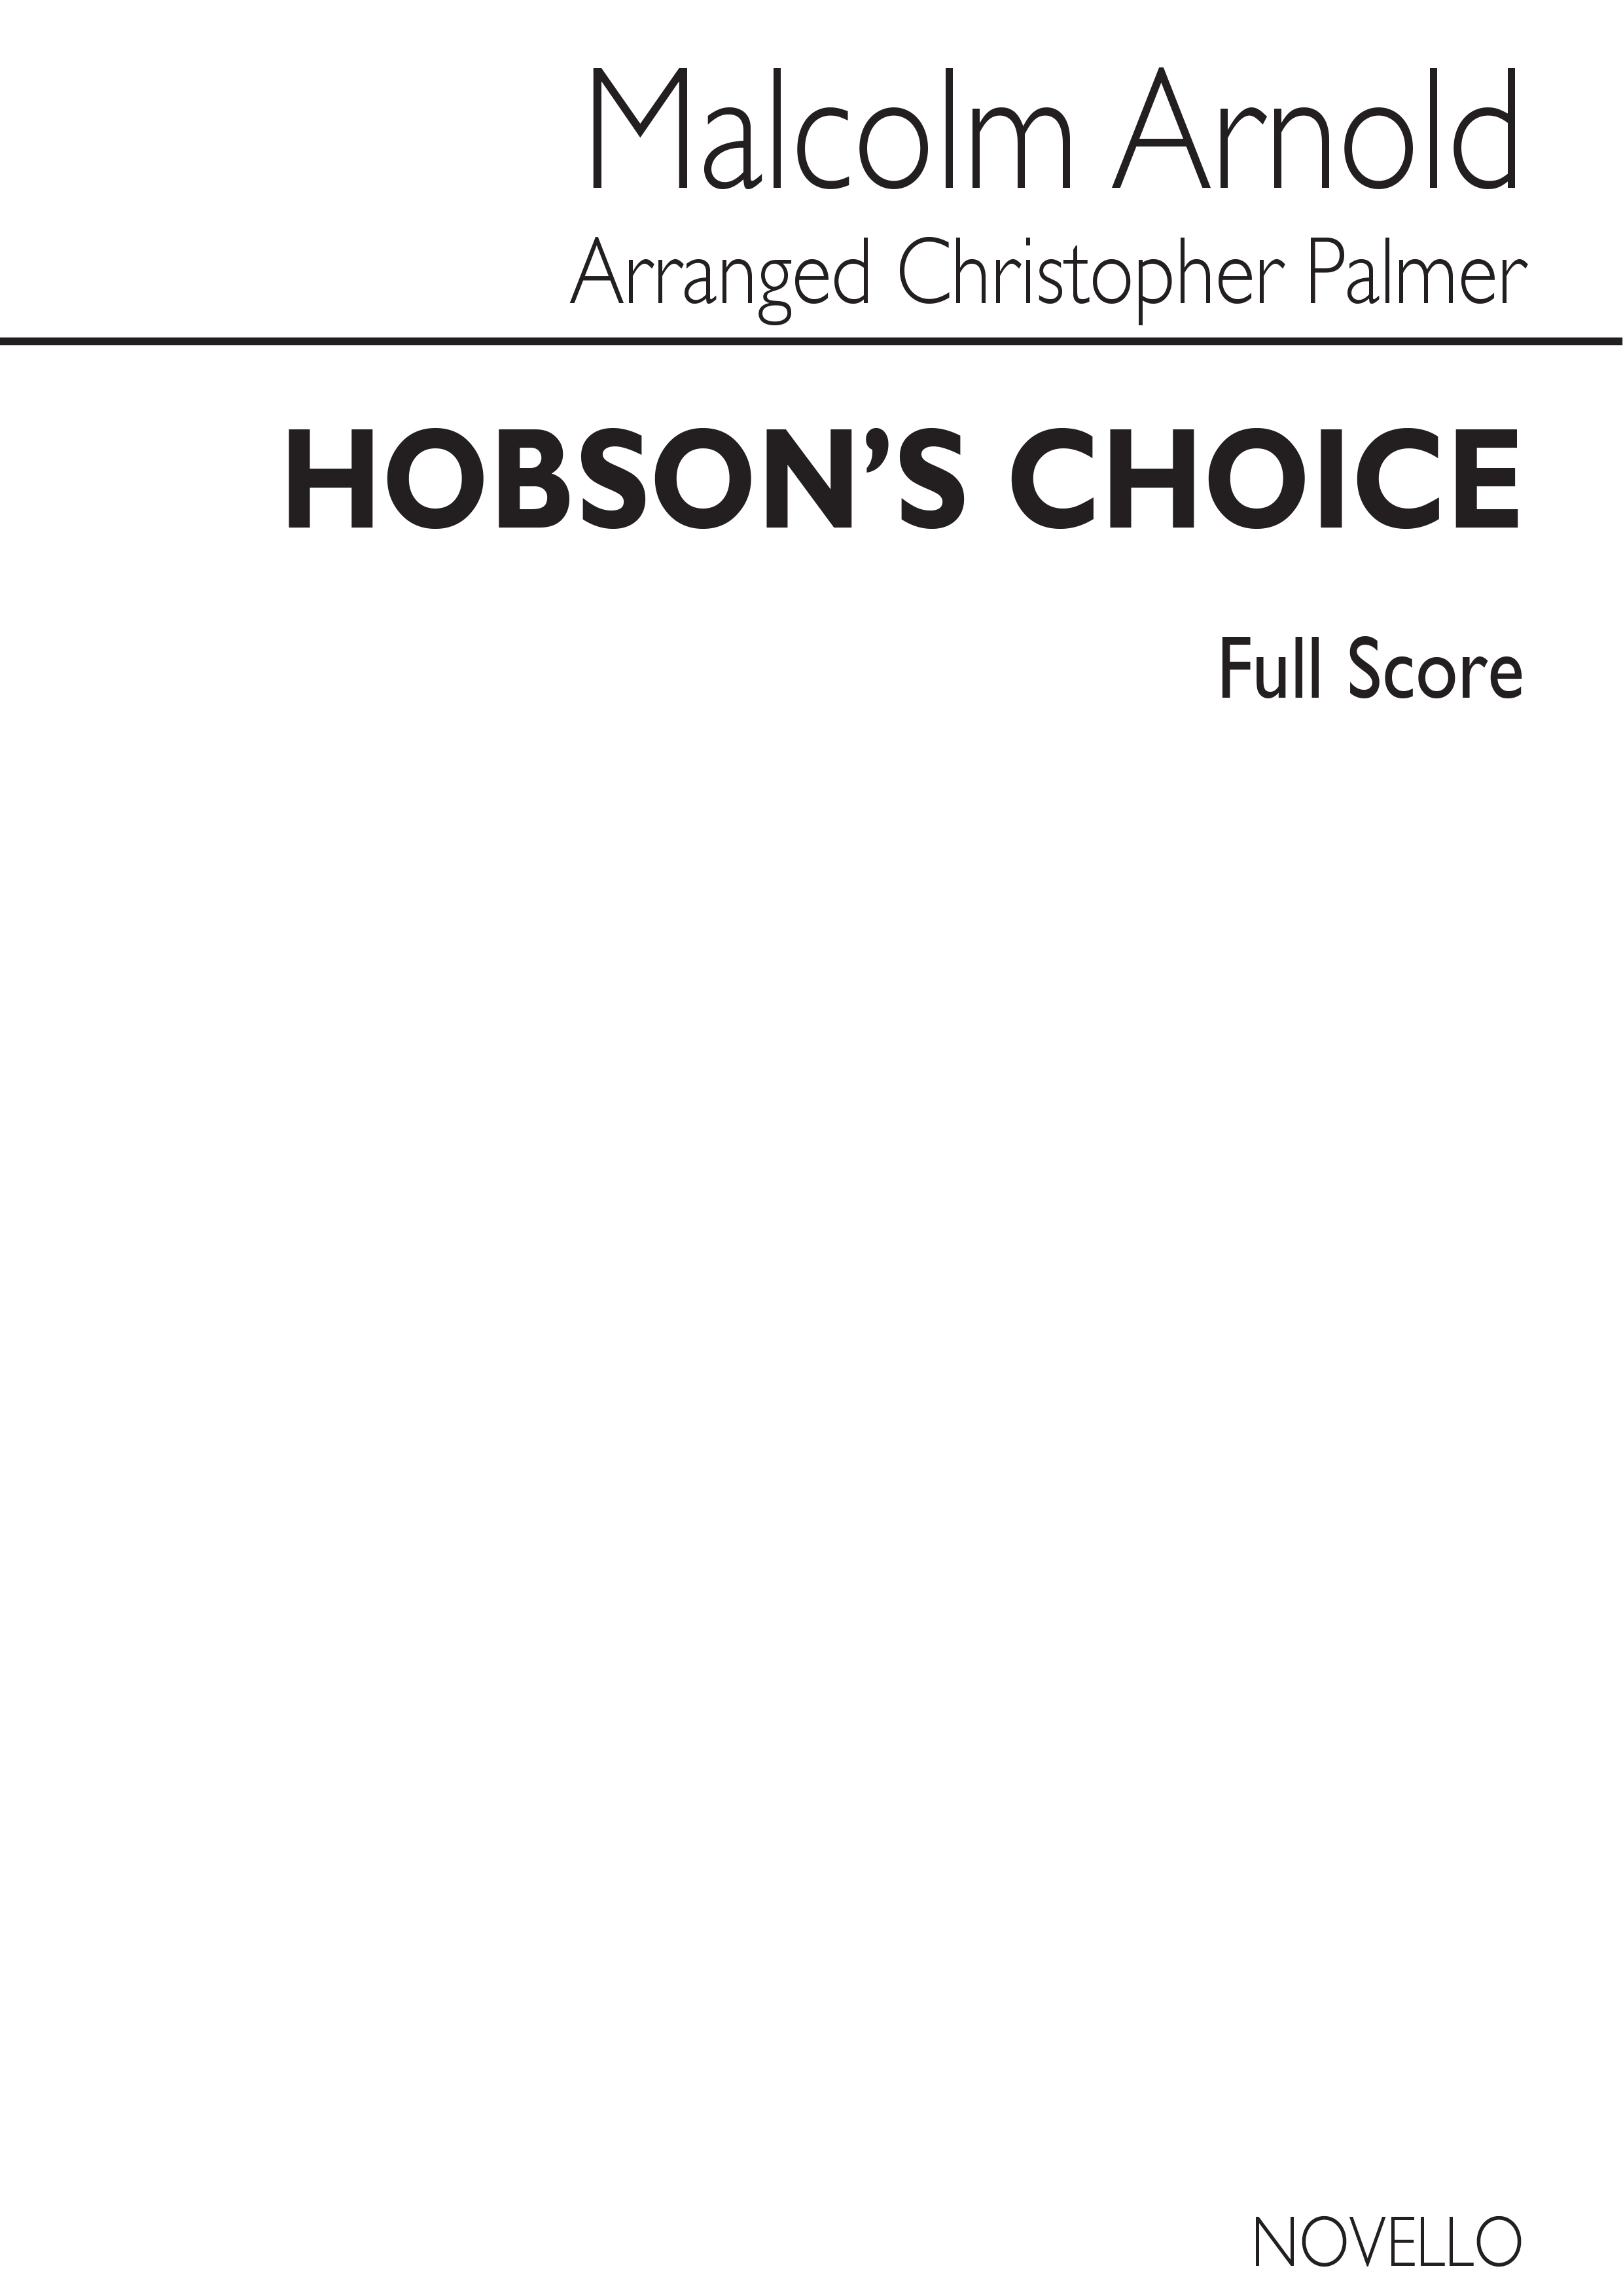 Malcolm Arnold: Hobson's Choice (Full Score): Orchestra: Score